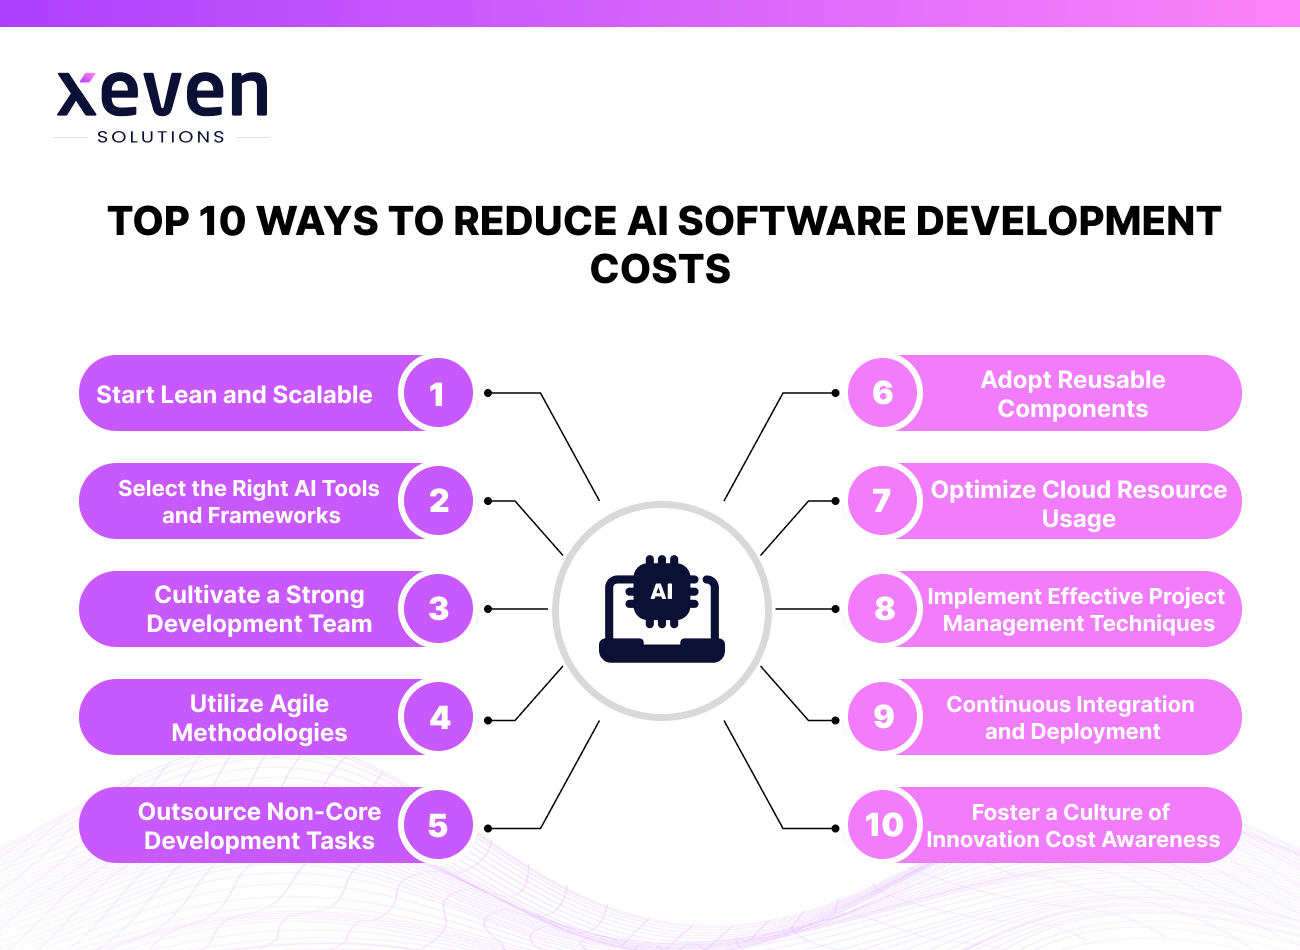 Top 10 Ways to Reduce AI Software Development Costs